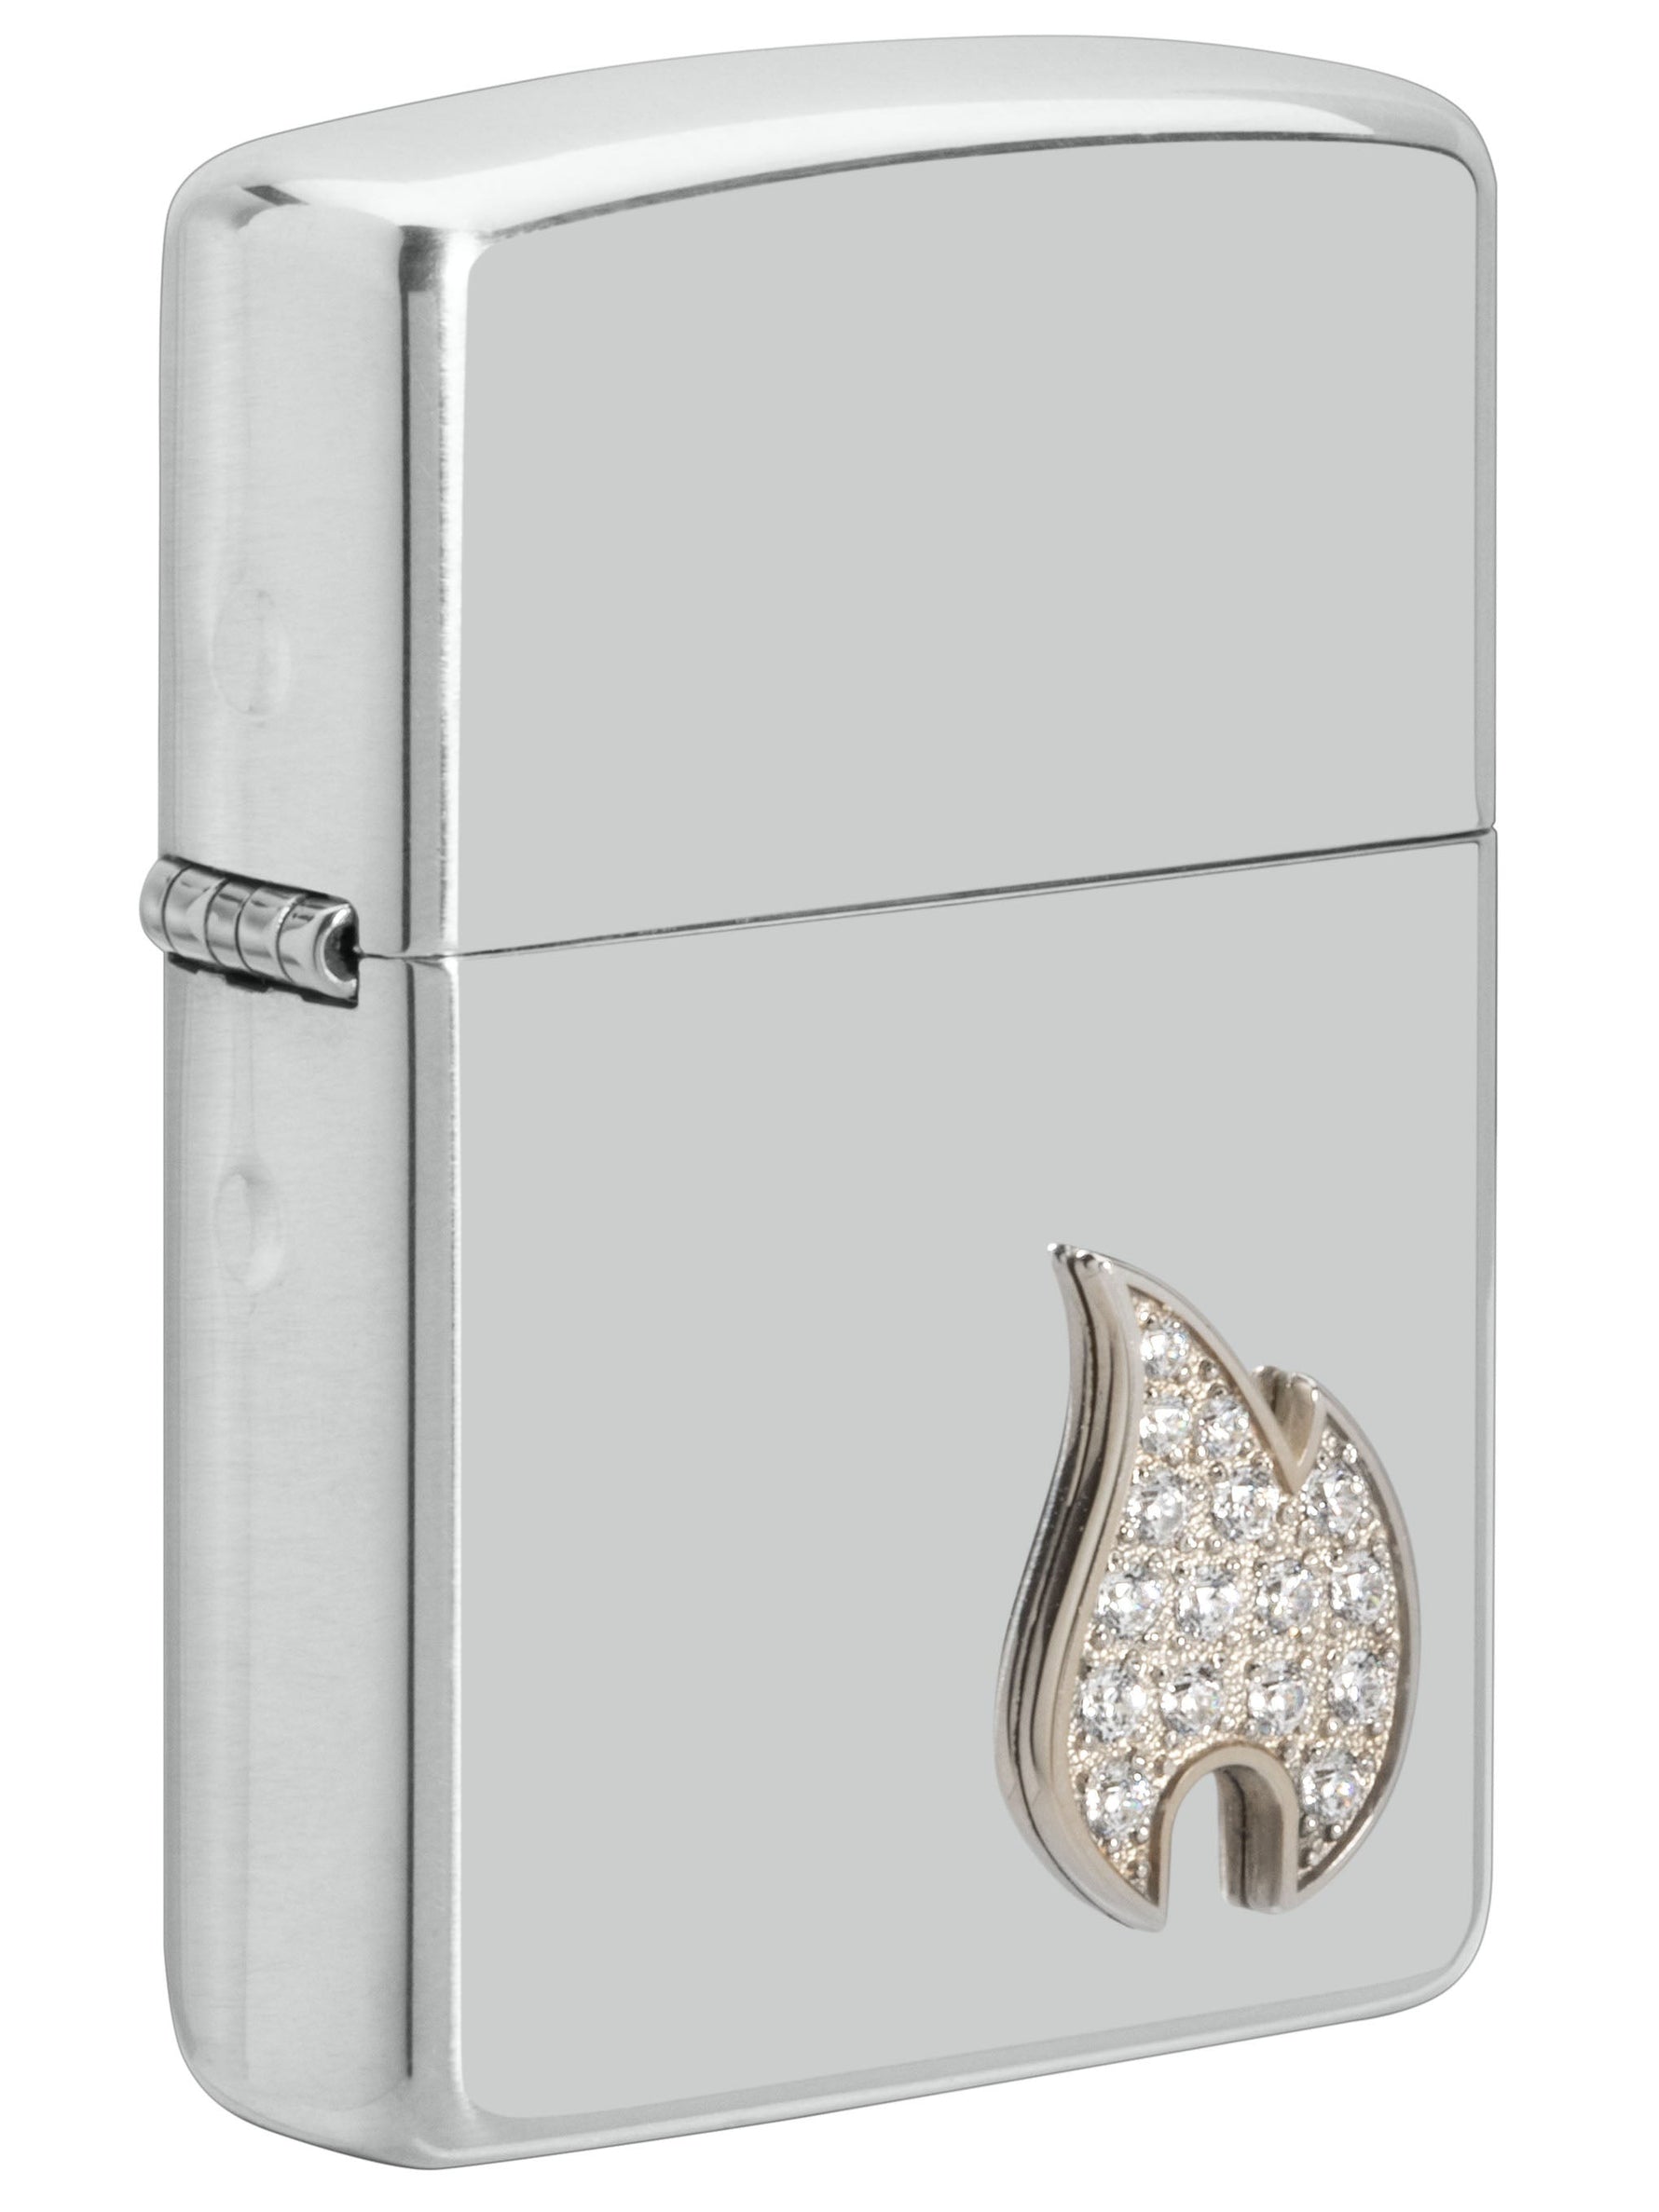 Zippo Lighter: Sterling Silver with Flame Emblem, Armor - High Polish 49554